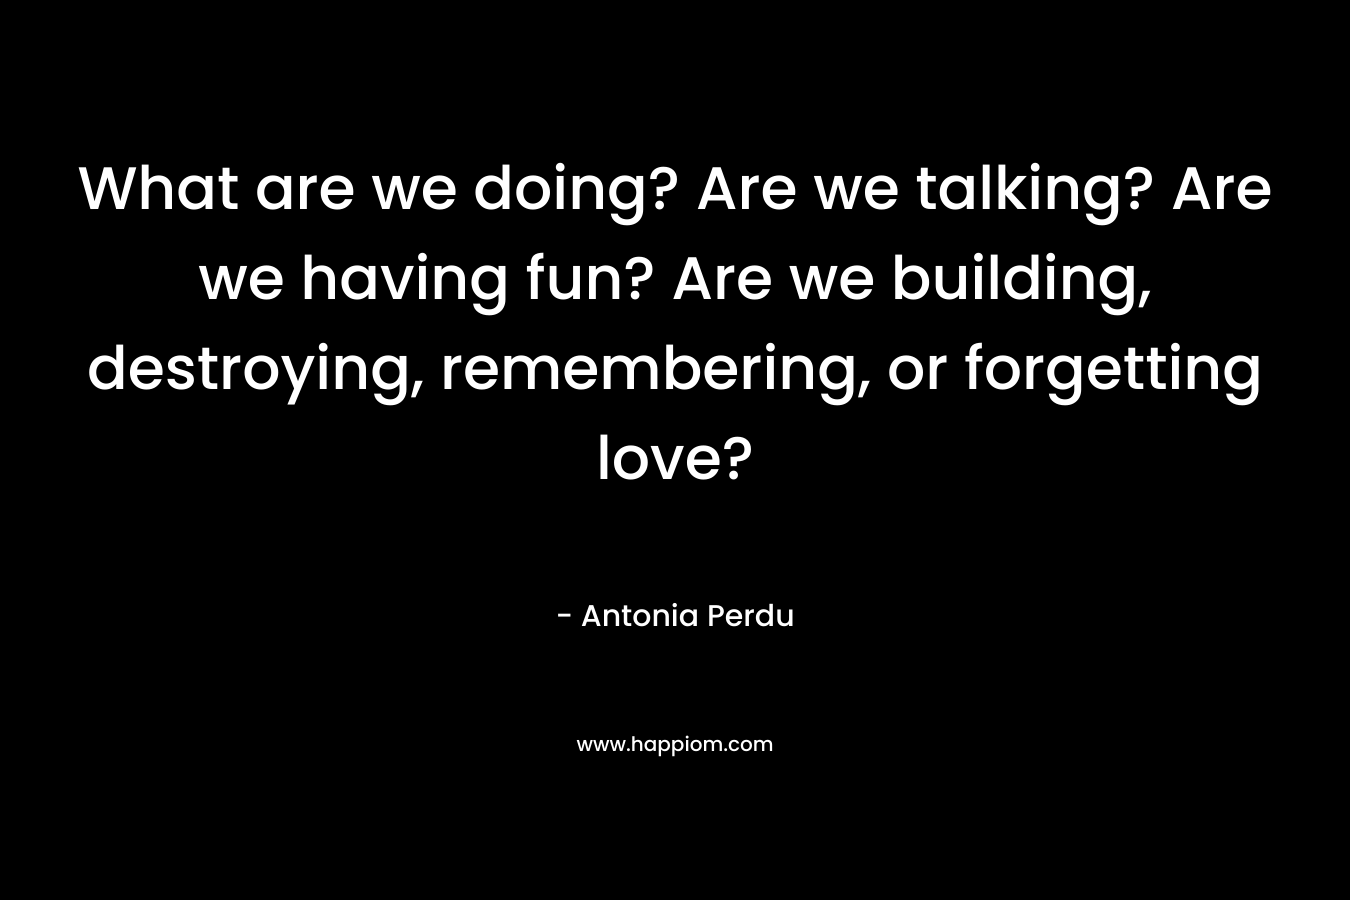 What are we doing? Are we talking? Are we having fun? Are we building, destroying, remembering, or forgetting love?